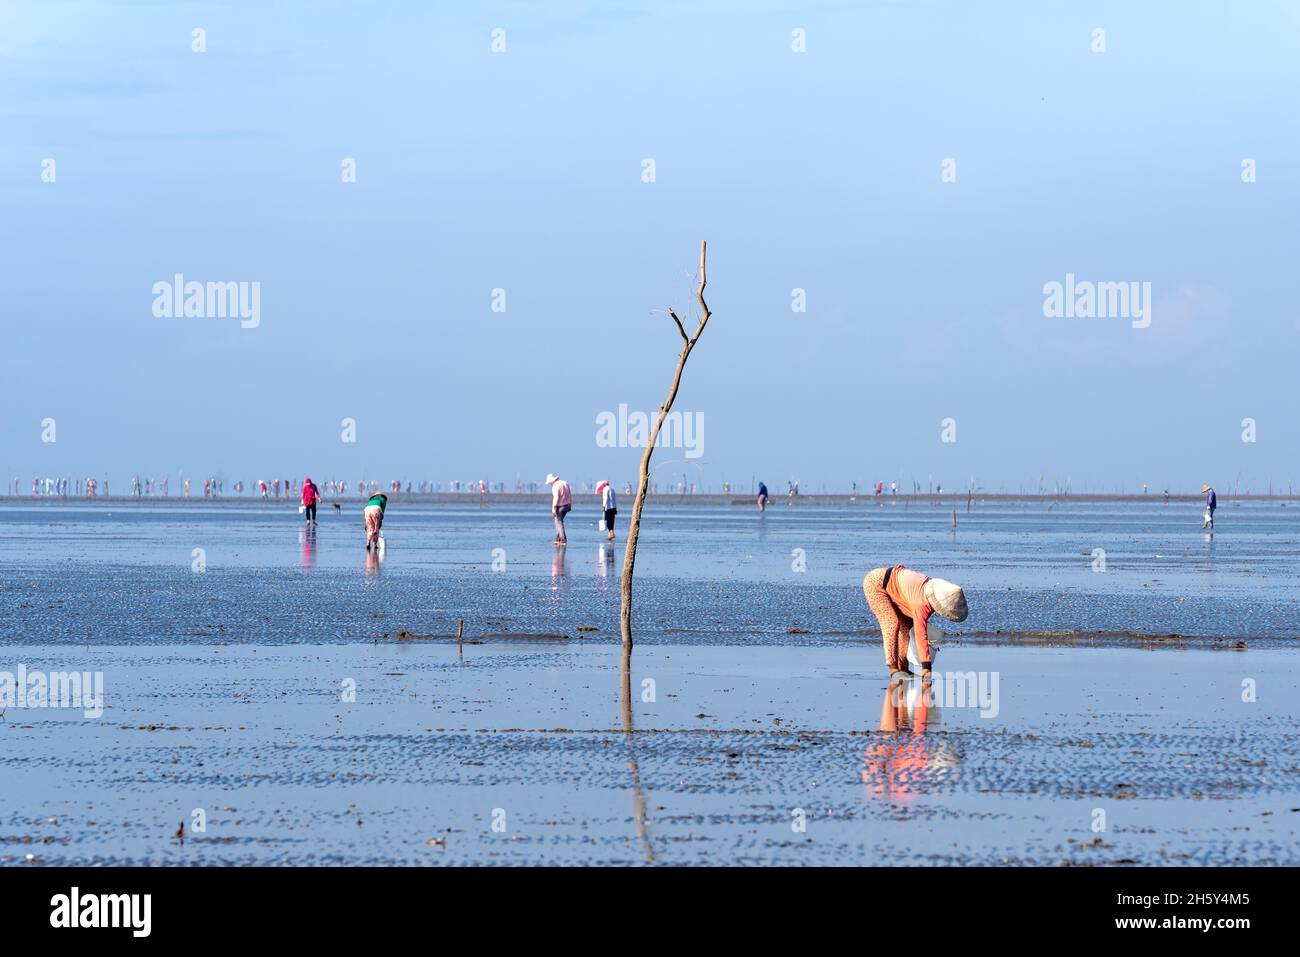 Can Gio District, Ho Chi Minh City, Vietnam - October 23, 2021: Fishermen harvest clams on the beach at low tide in Can Gio district, HCMC, Vietnam Stock Photo